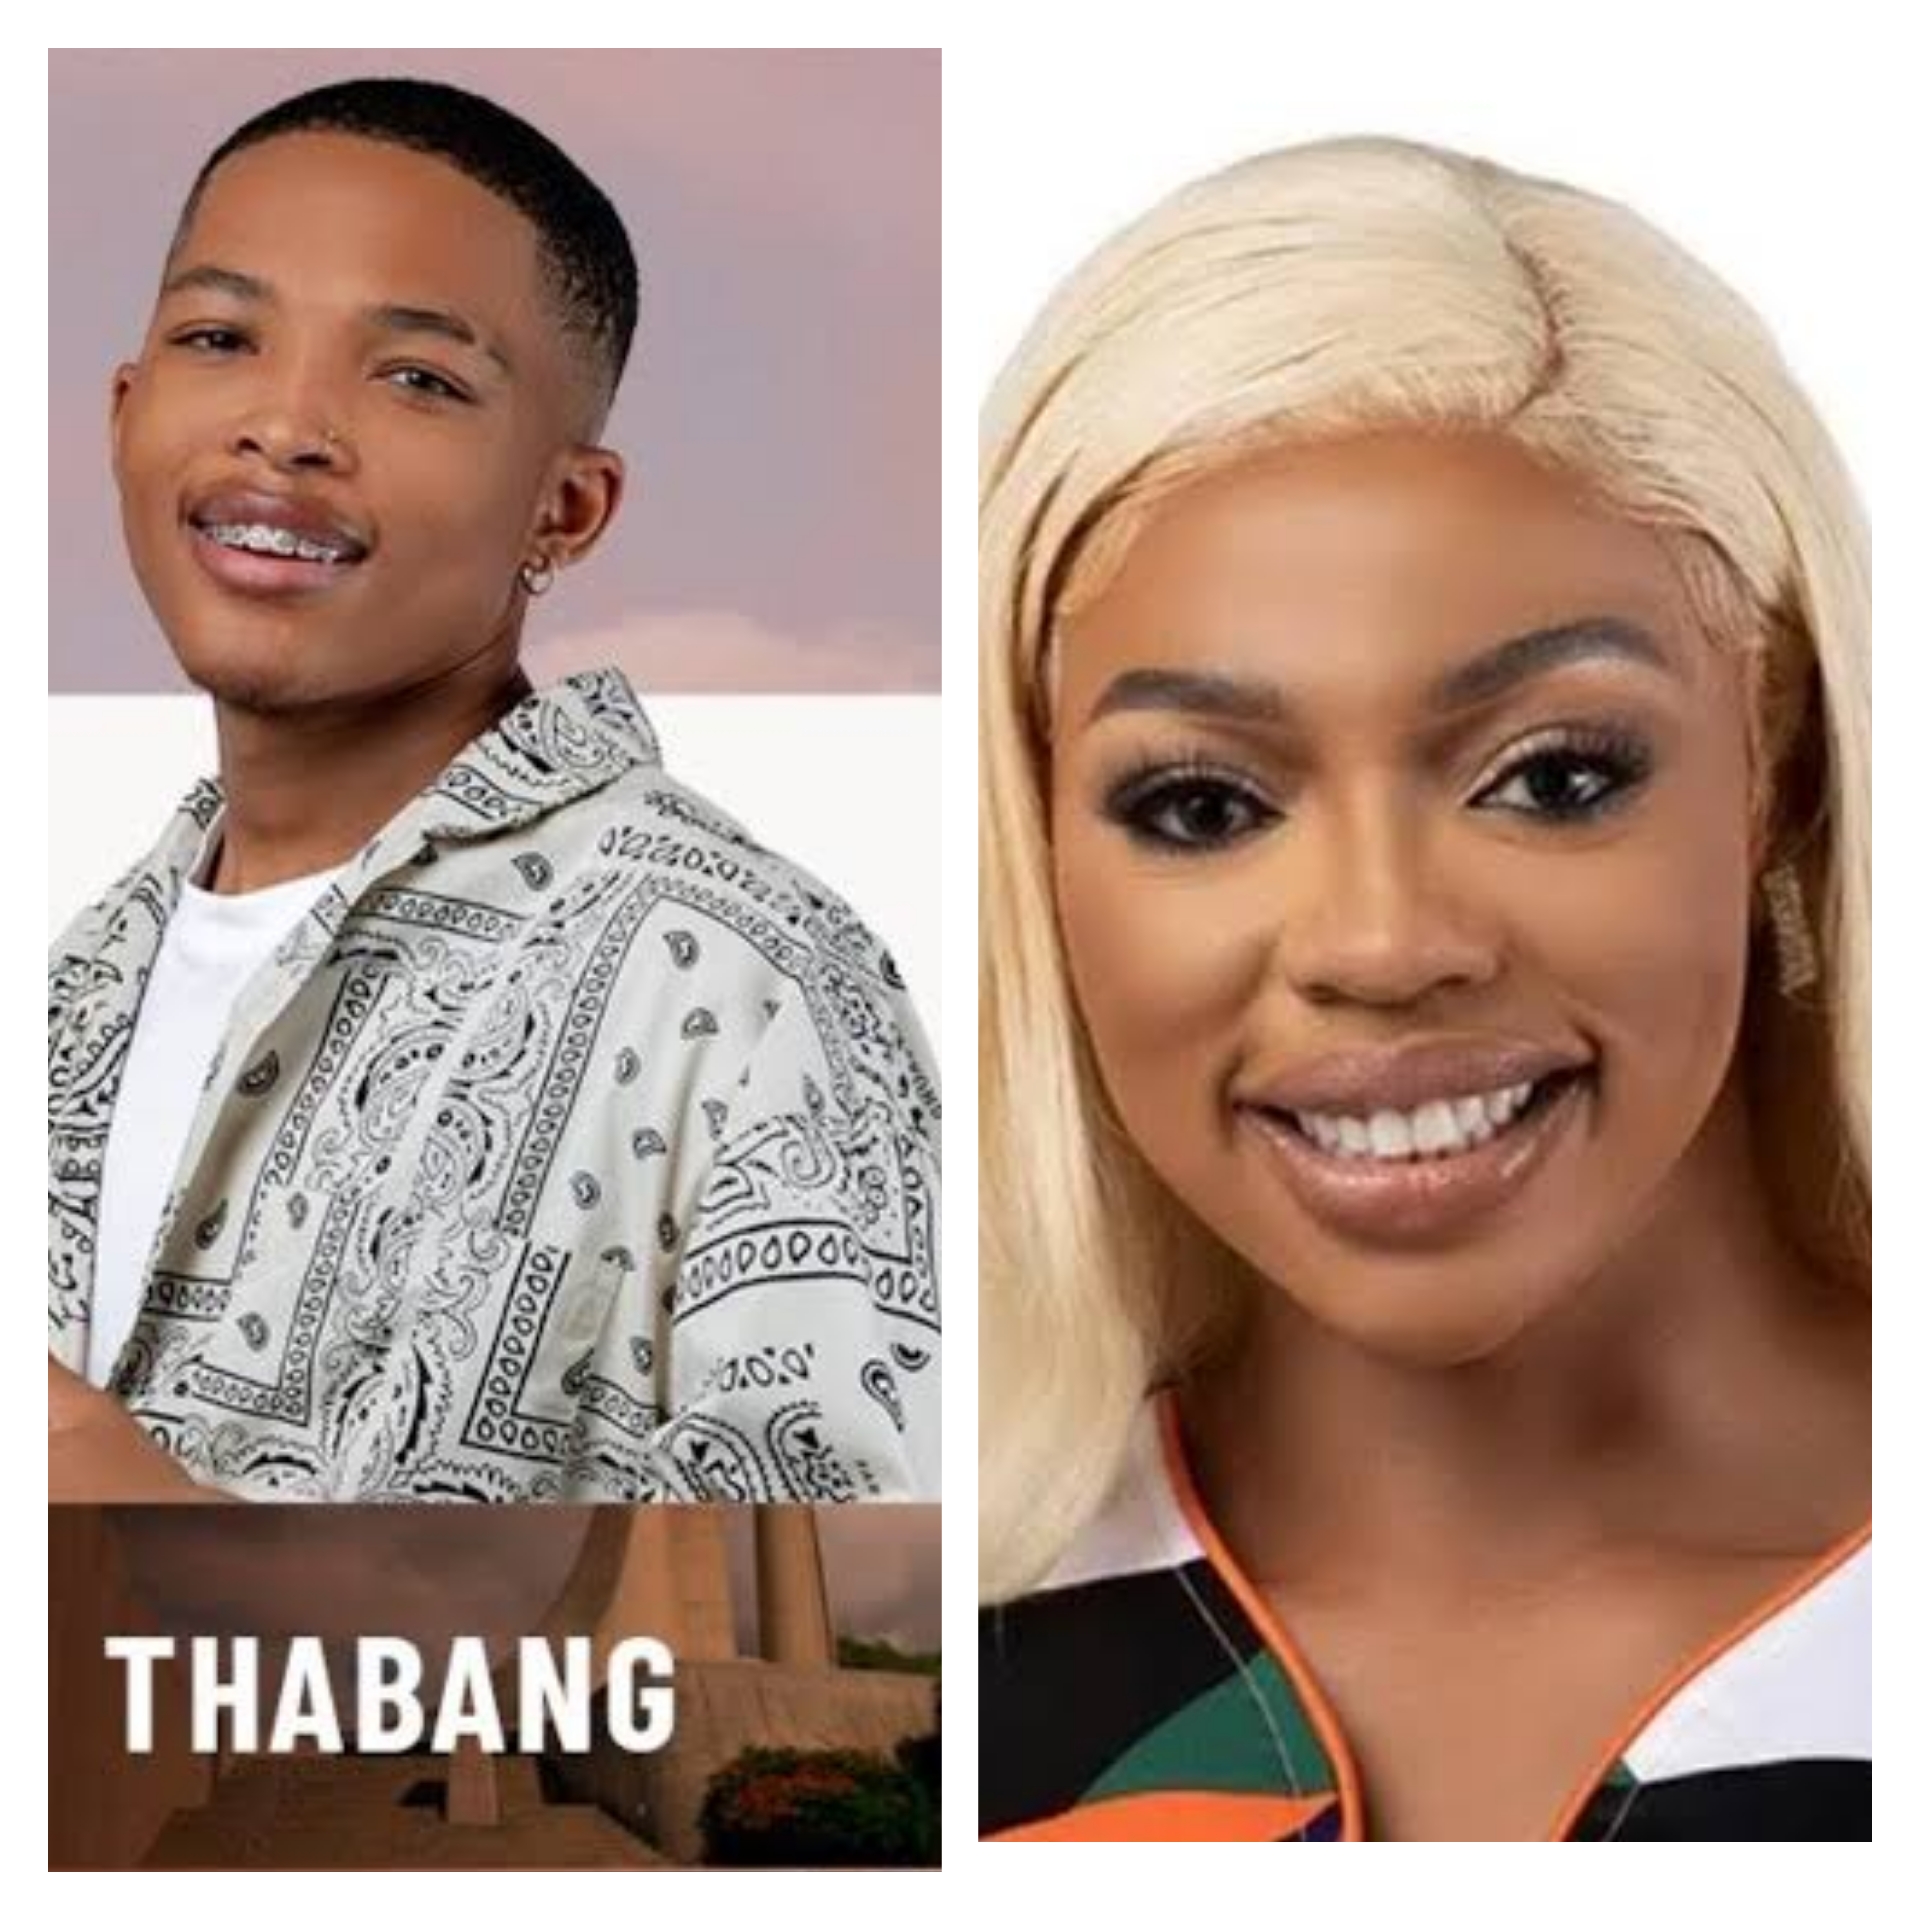 Bbtitans Housemates Khosi And Thabang Kiss And Social Media Goes Crazy, Yours Truly, Top Stories, March 22, 2023